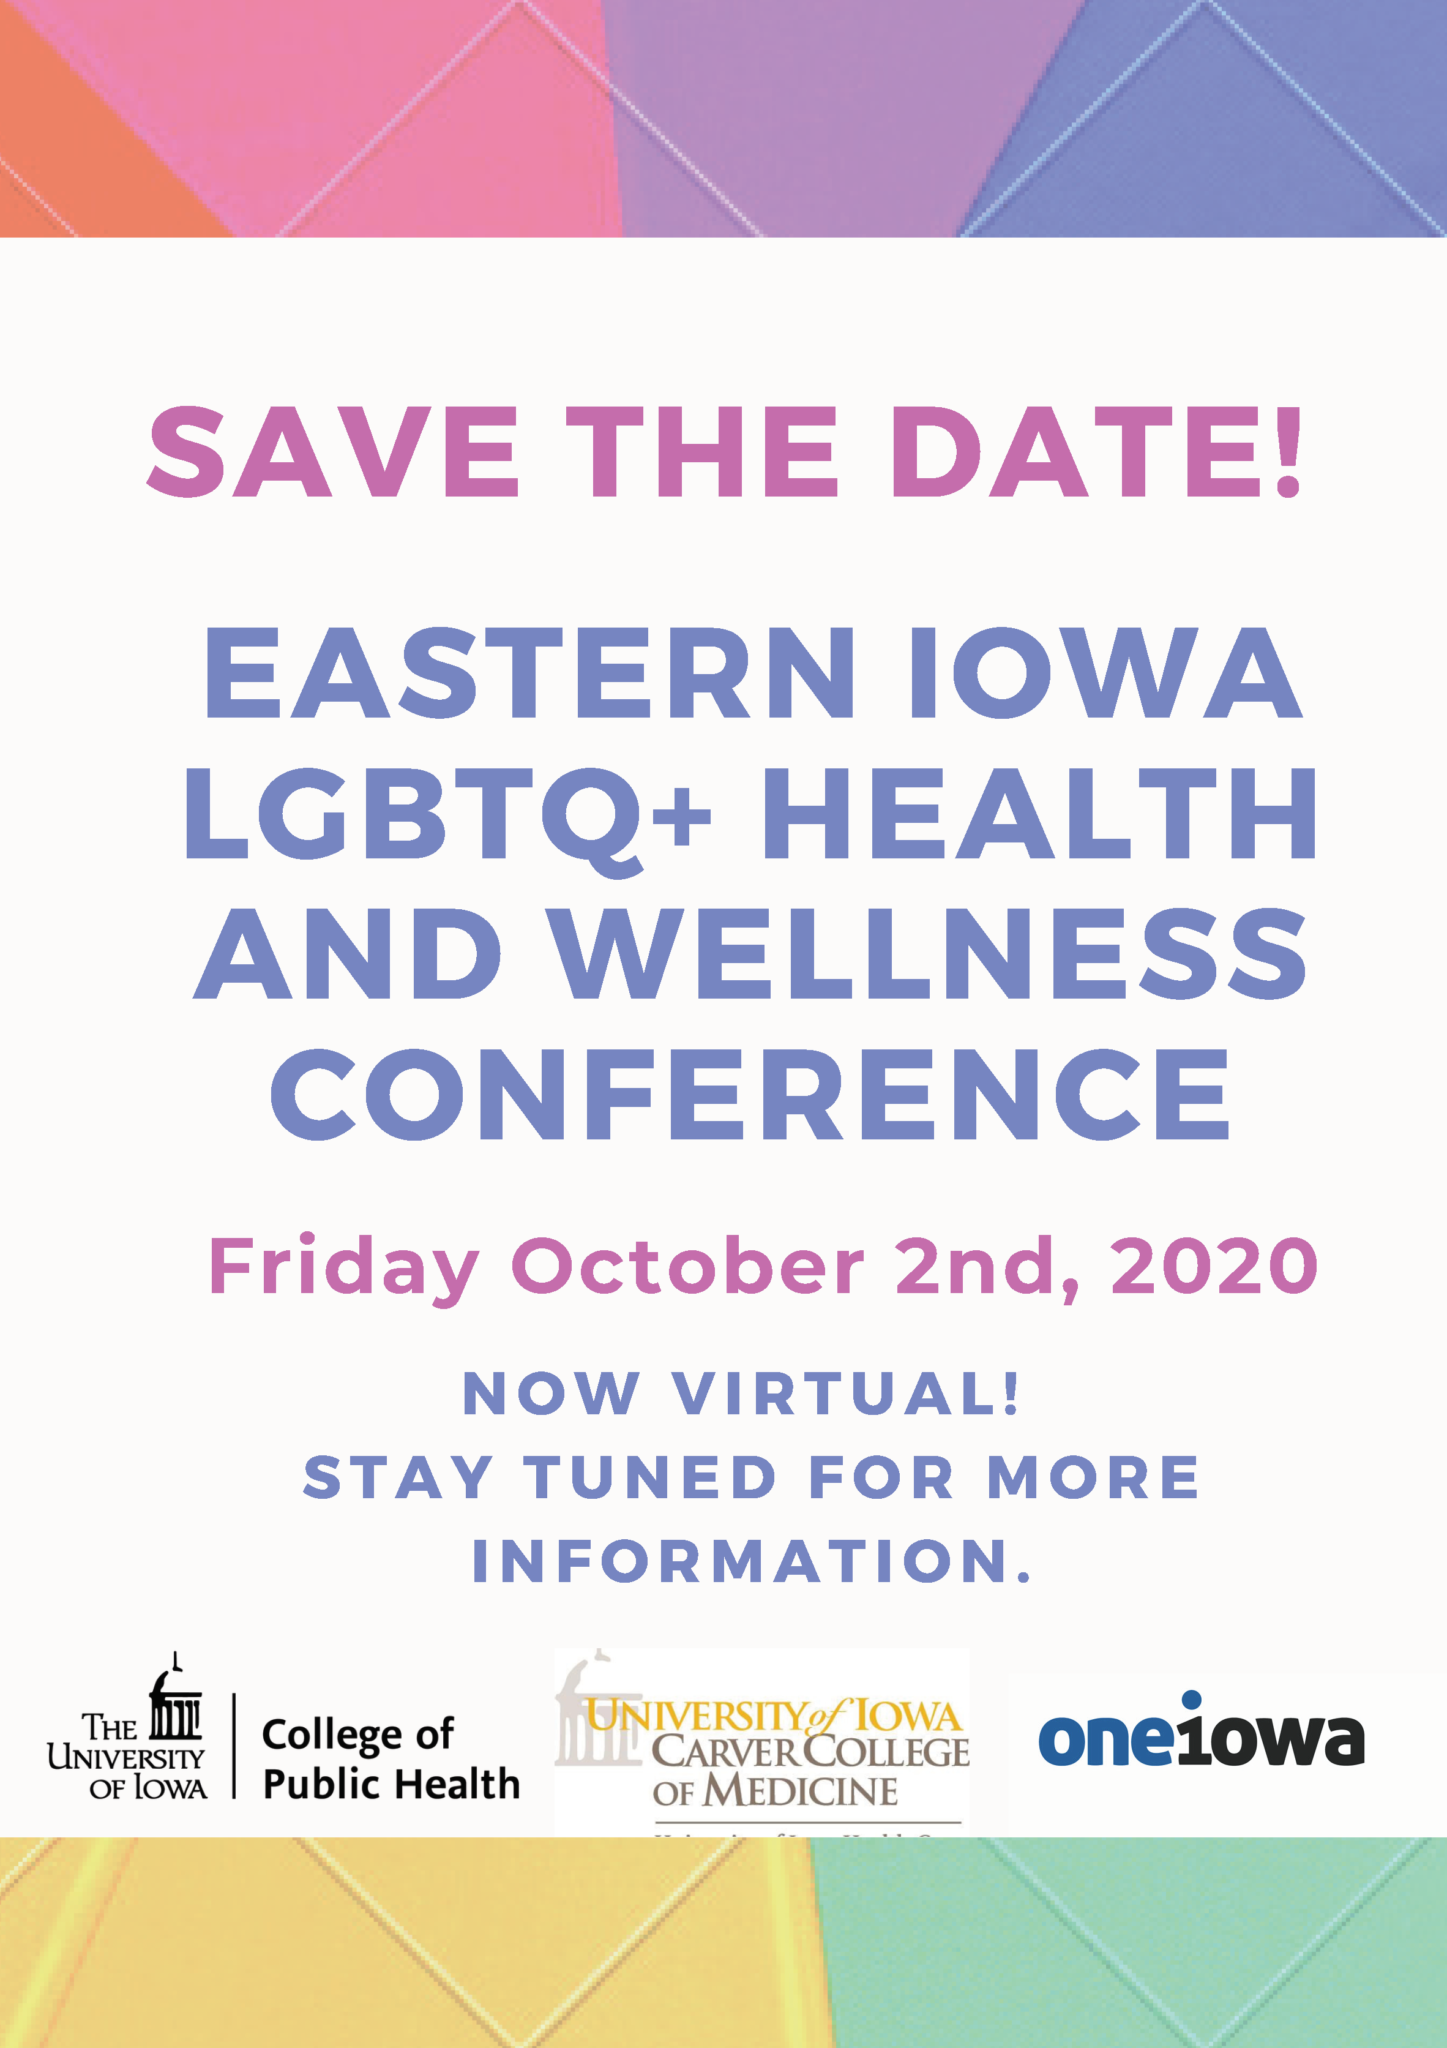 Save the date LGBTQ Health and Wellness Conference is Oct. 2